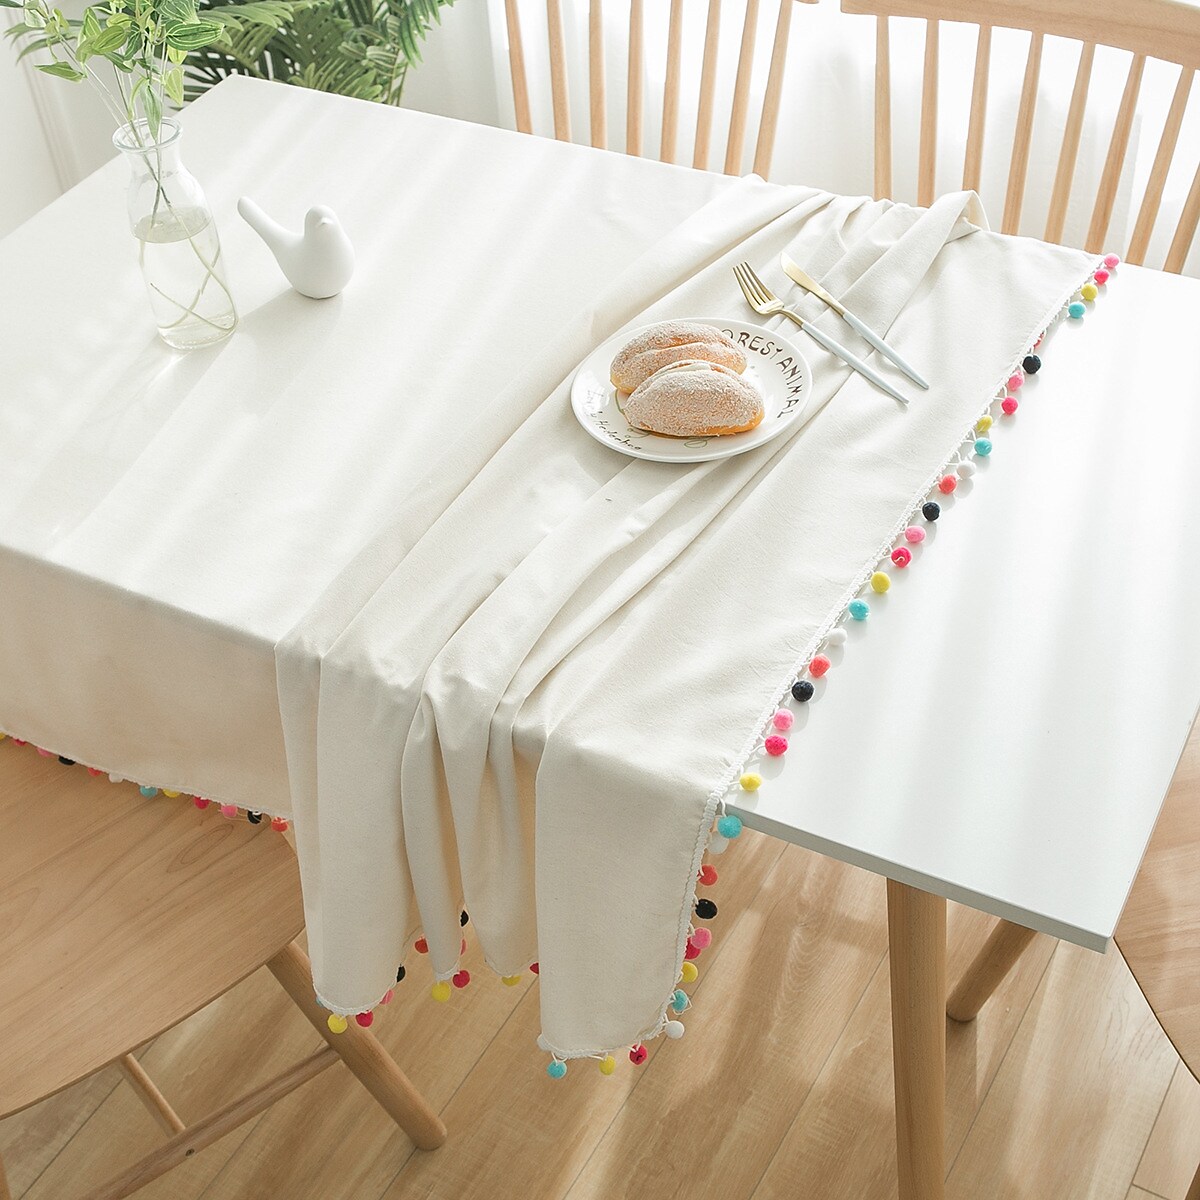 Farmhouse Style Tablecloth Cotton Linen Rectangle Table Cloths for Kitchen Dining, Party, Holiday, Christmas, Buffet